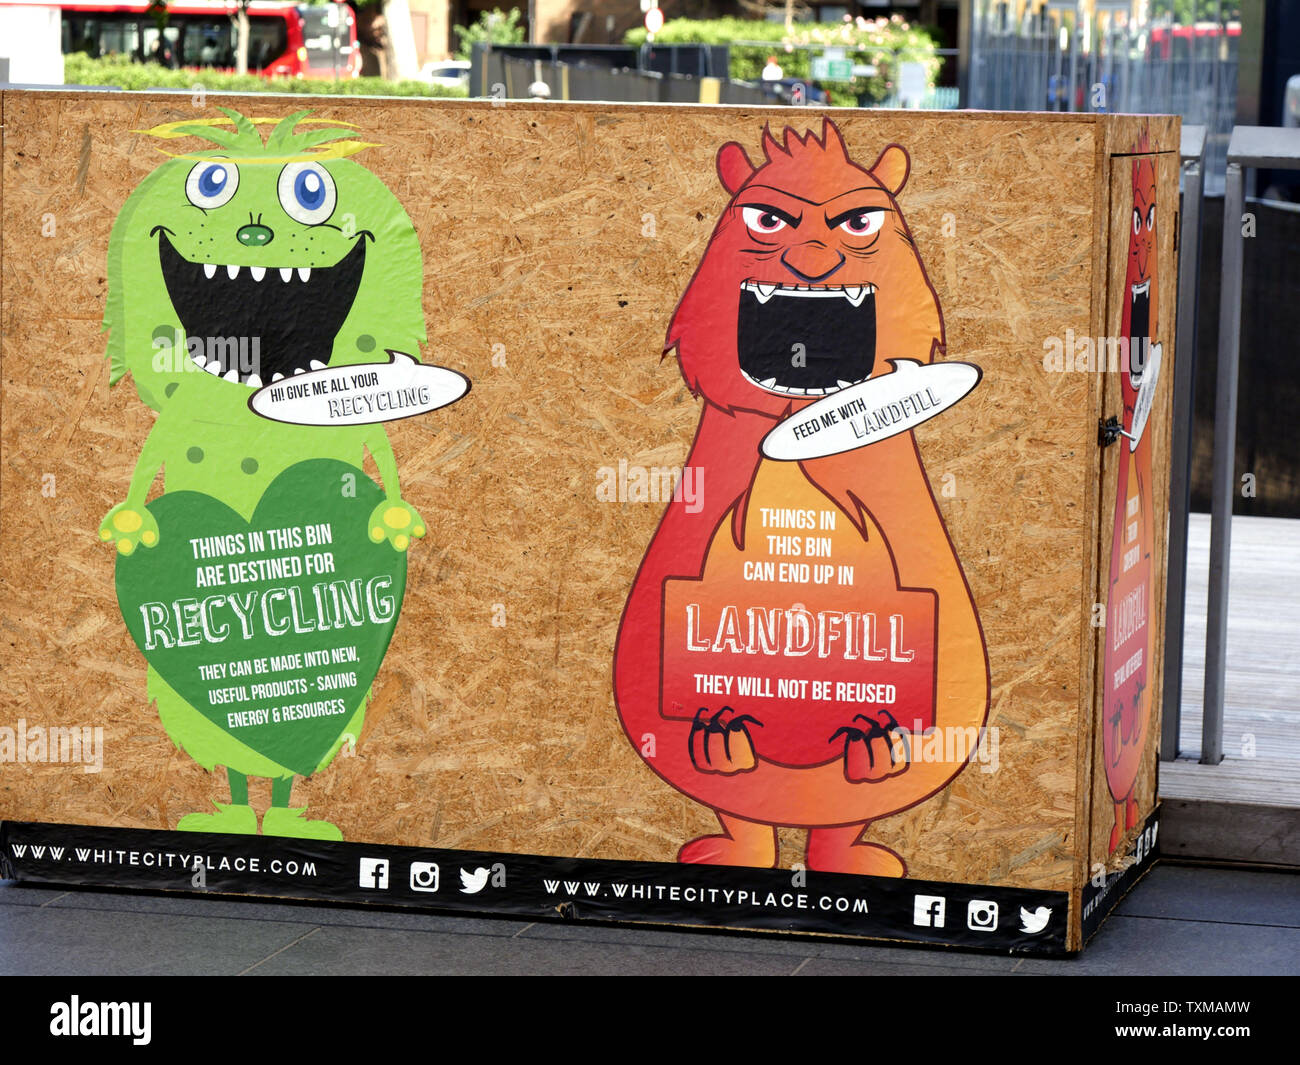 Box with comic characters to encourage recycling and show how landfill is not recycled at White City Place, London, UK Stock Photo